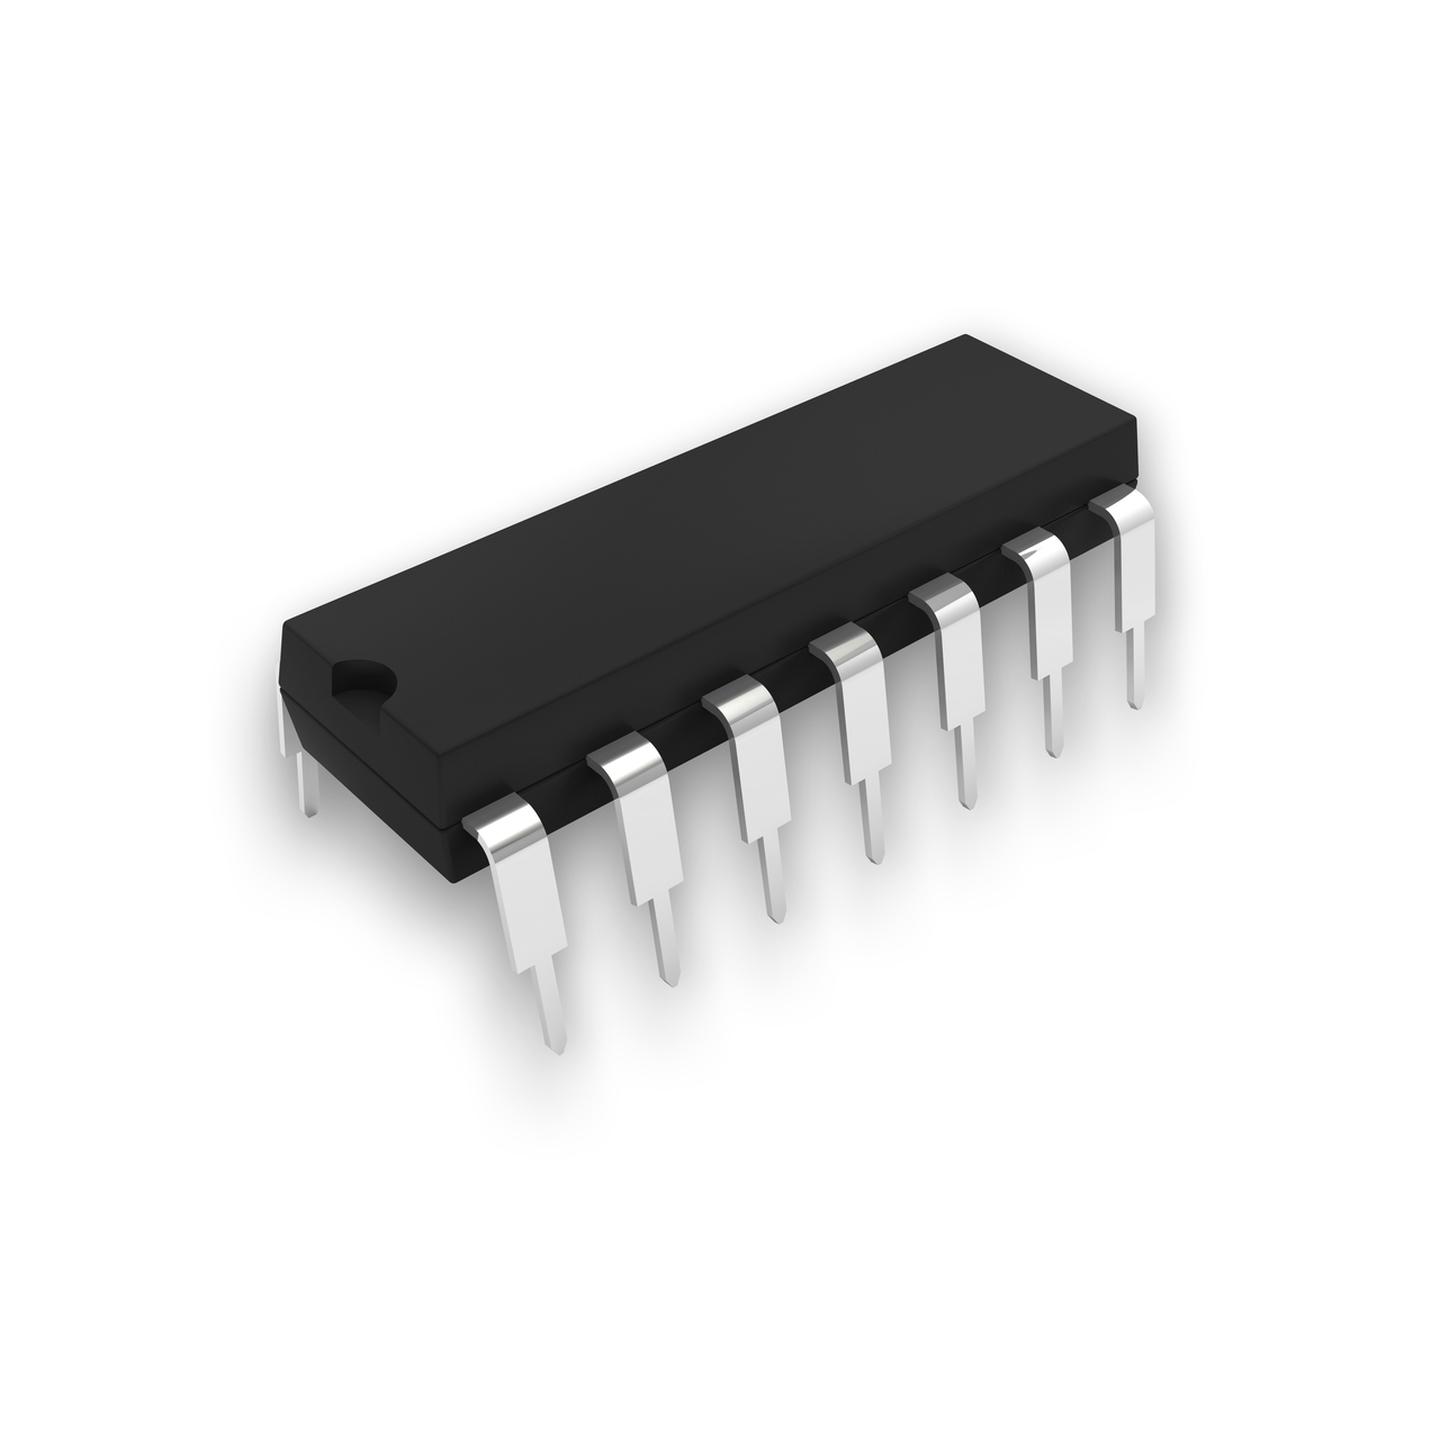 74LS01 Quad 2-in NAND Gate Low power Schottky IC